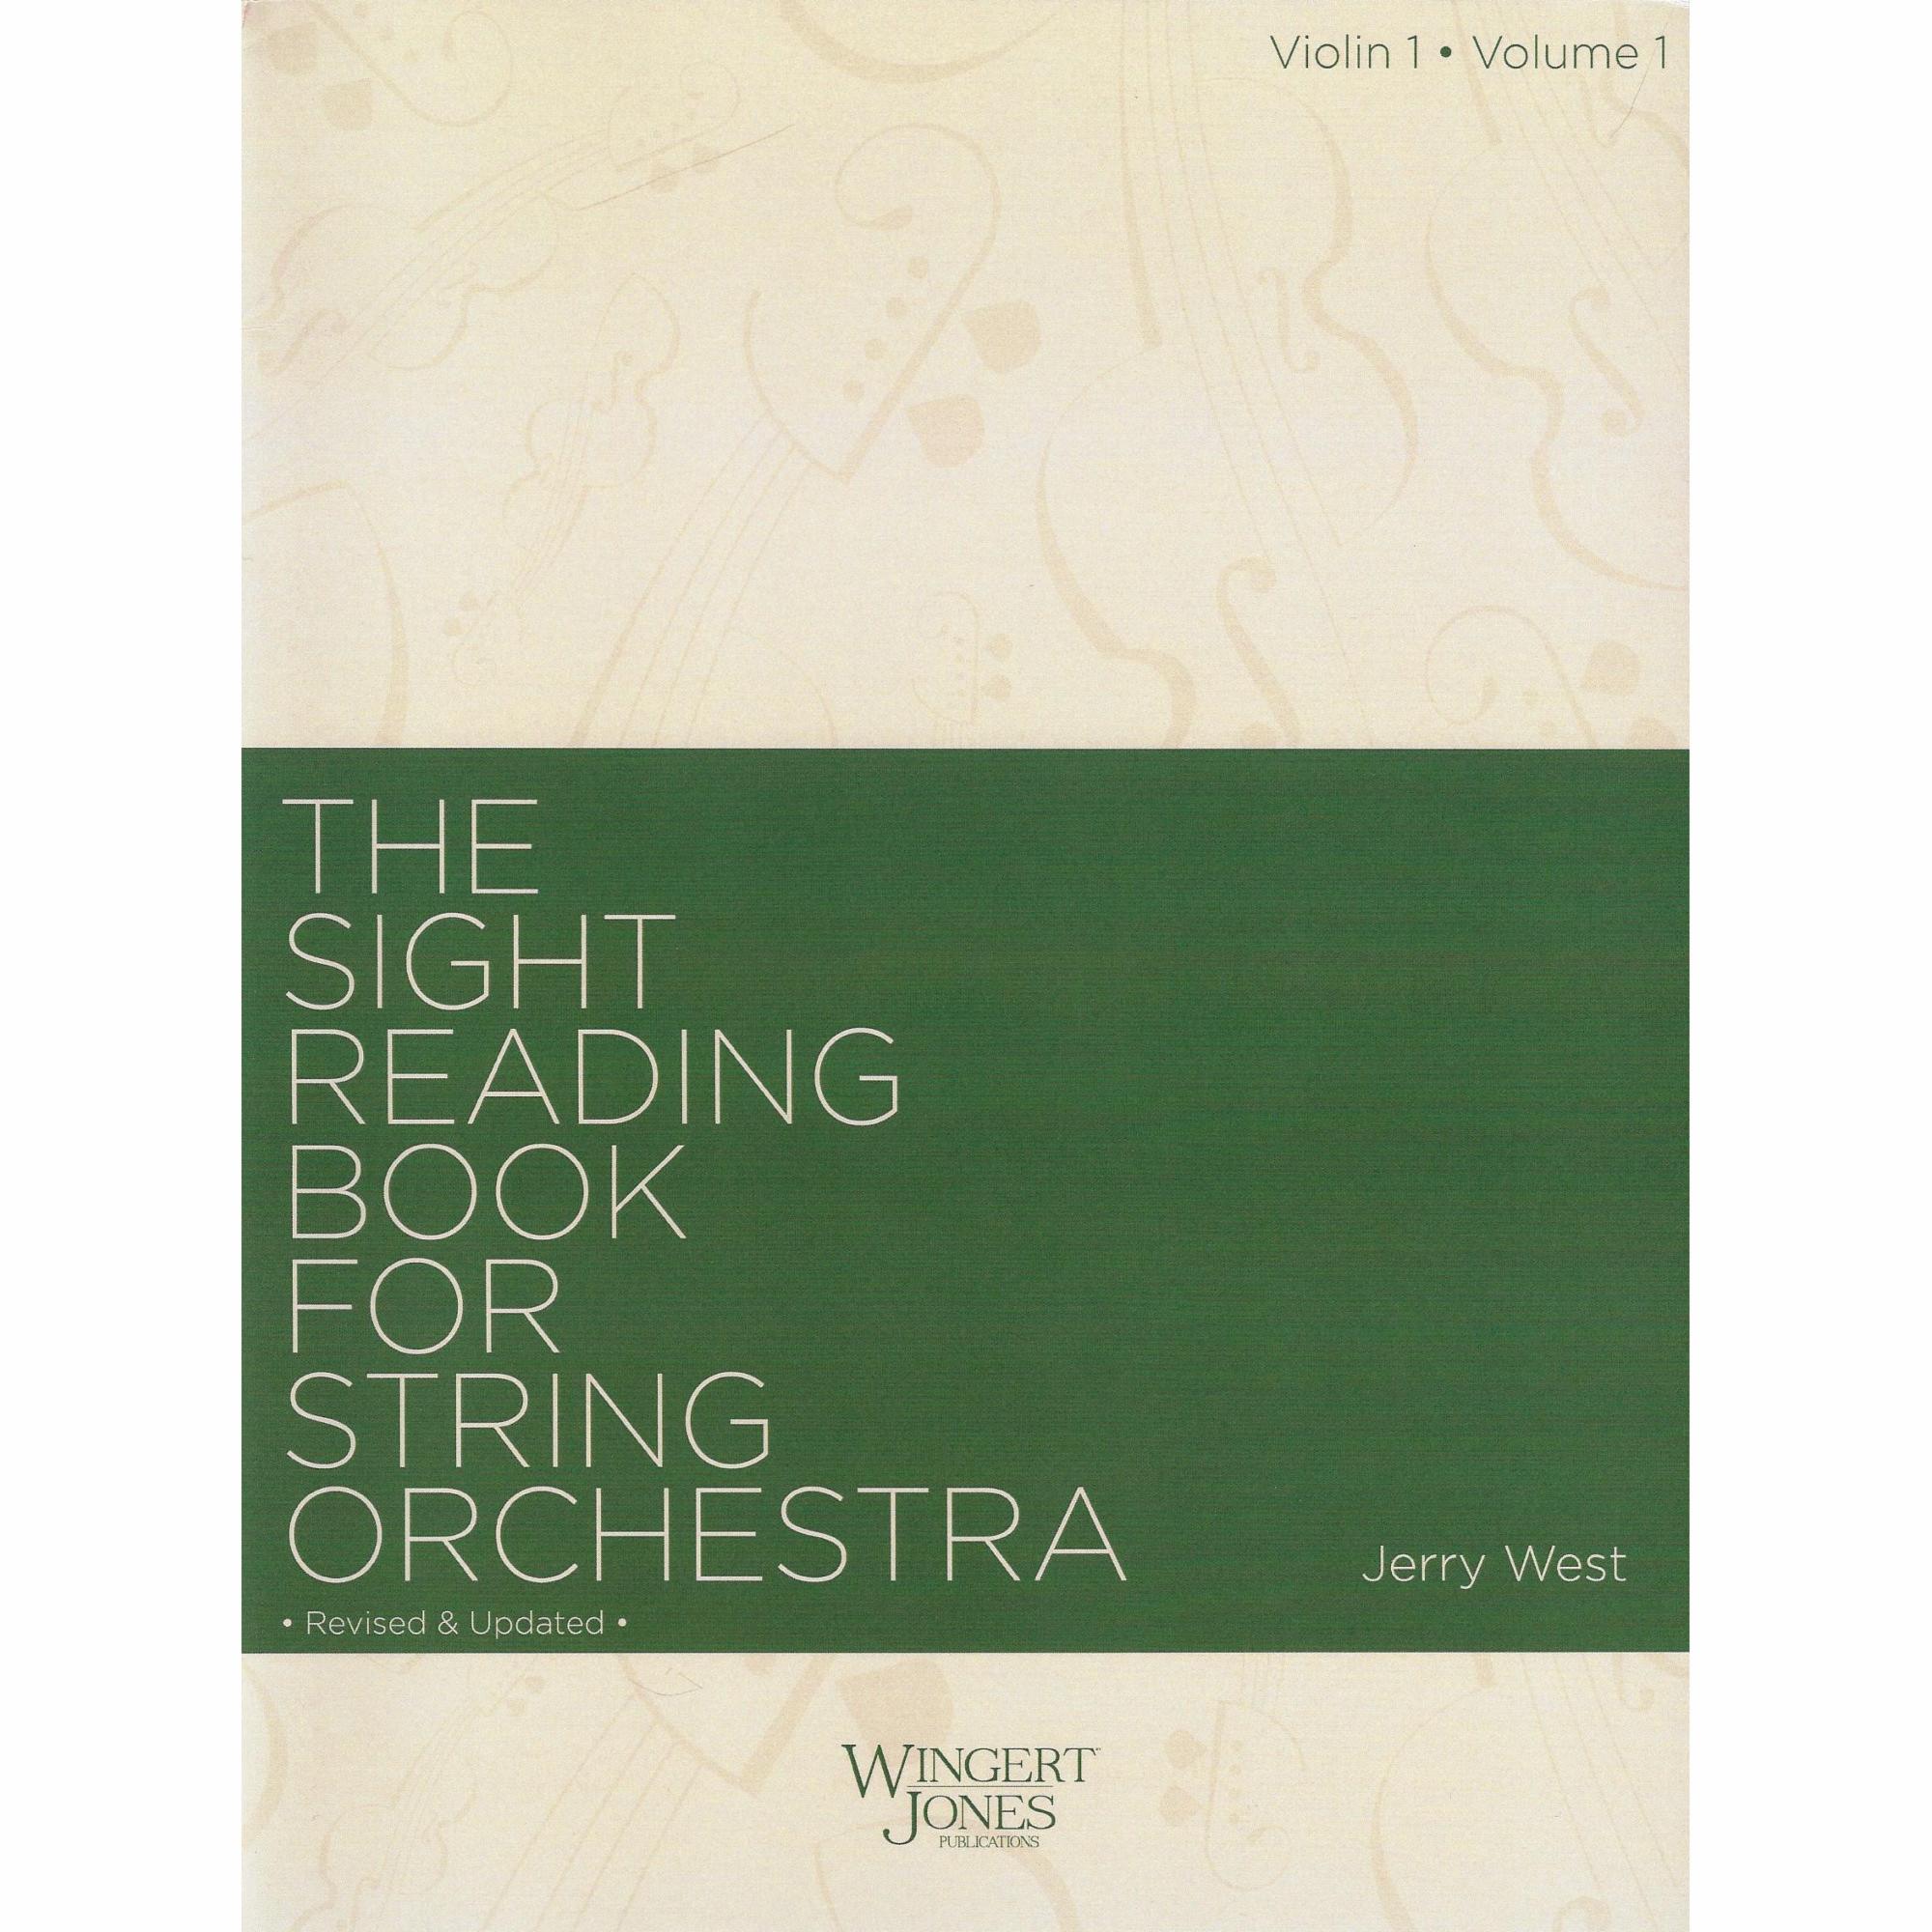 The Sight Reading Book, Volume 1 for String Orchestra